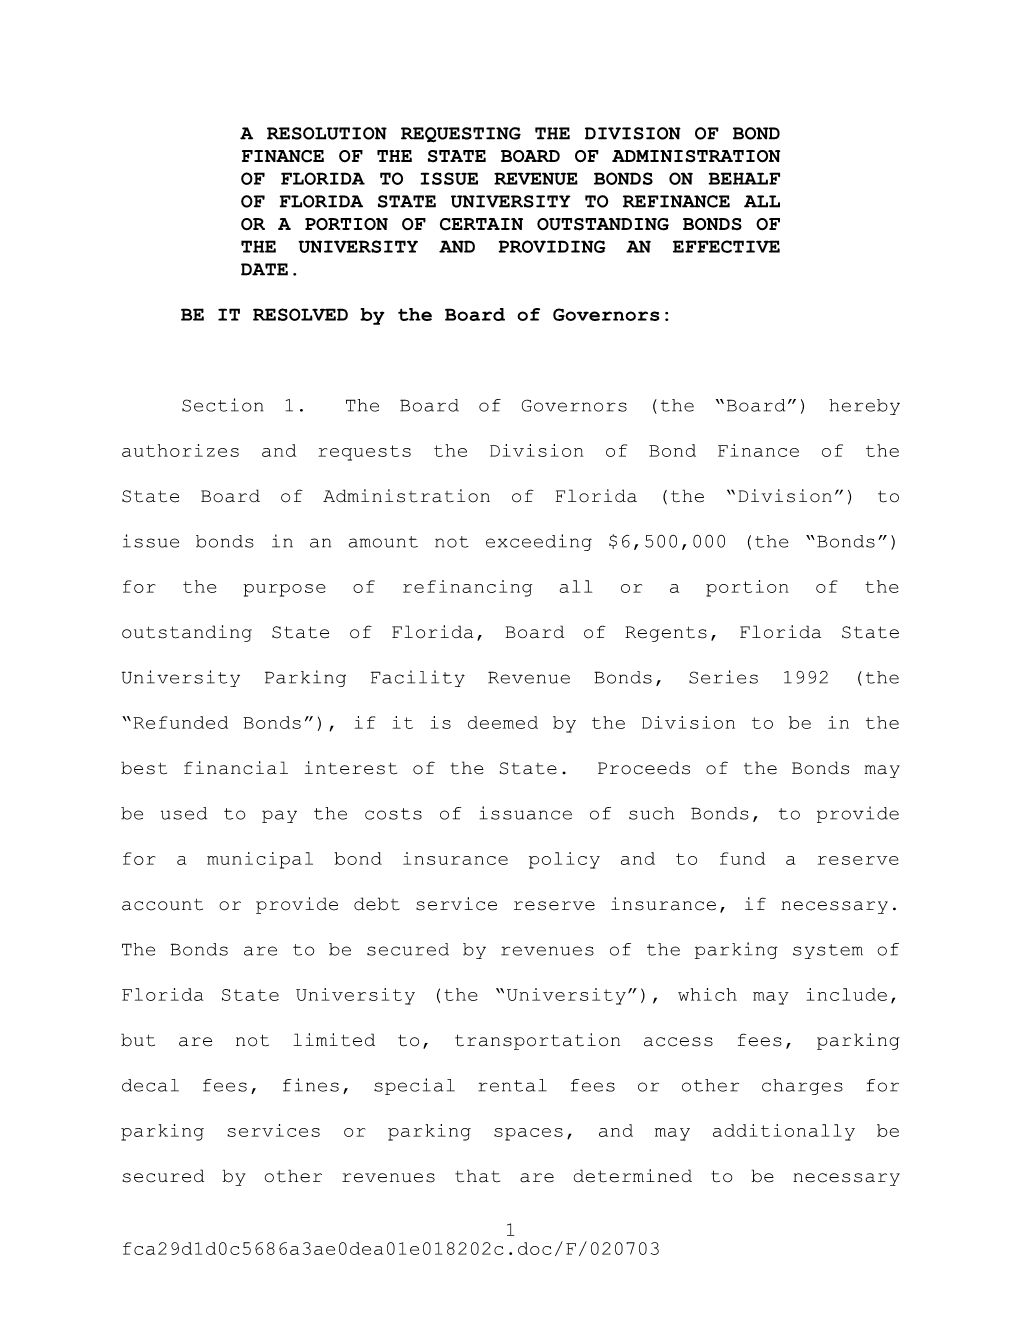 A Resolution Requesting the Division of Bond Finance of the State Board of Administration